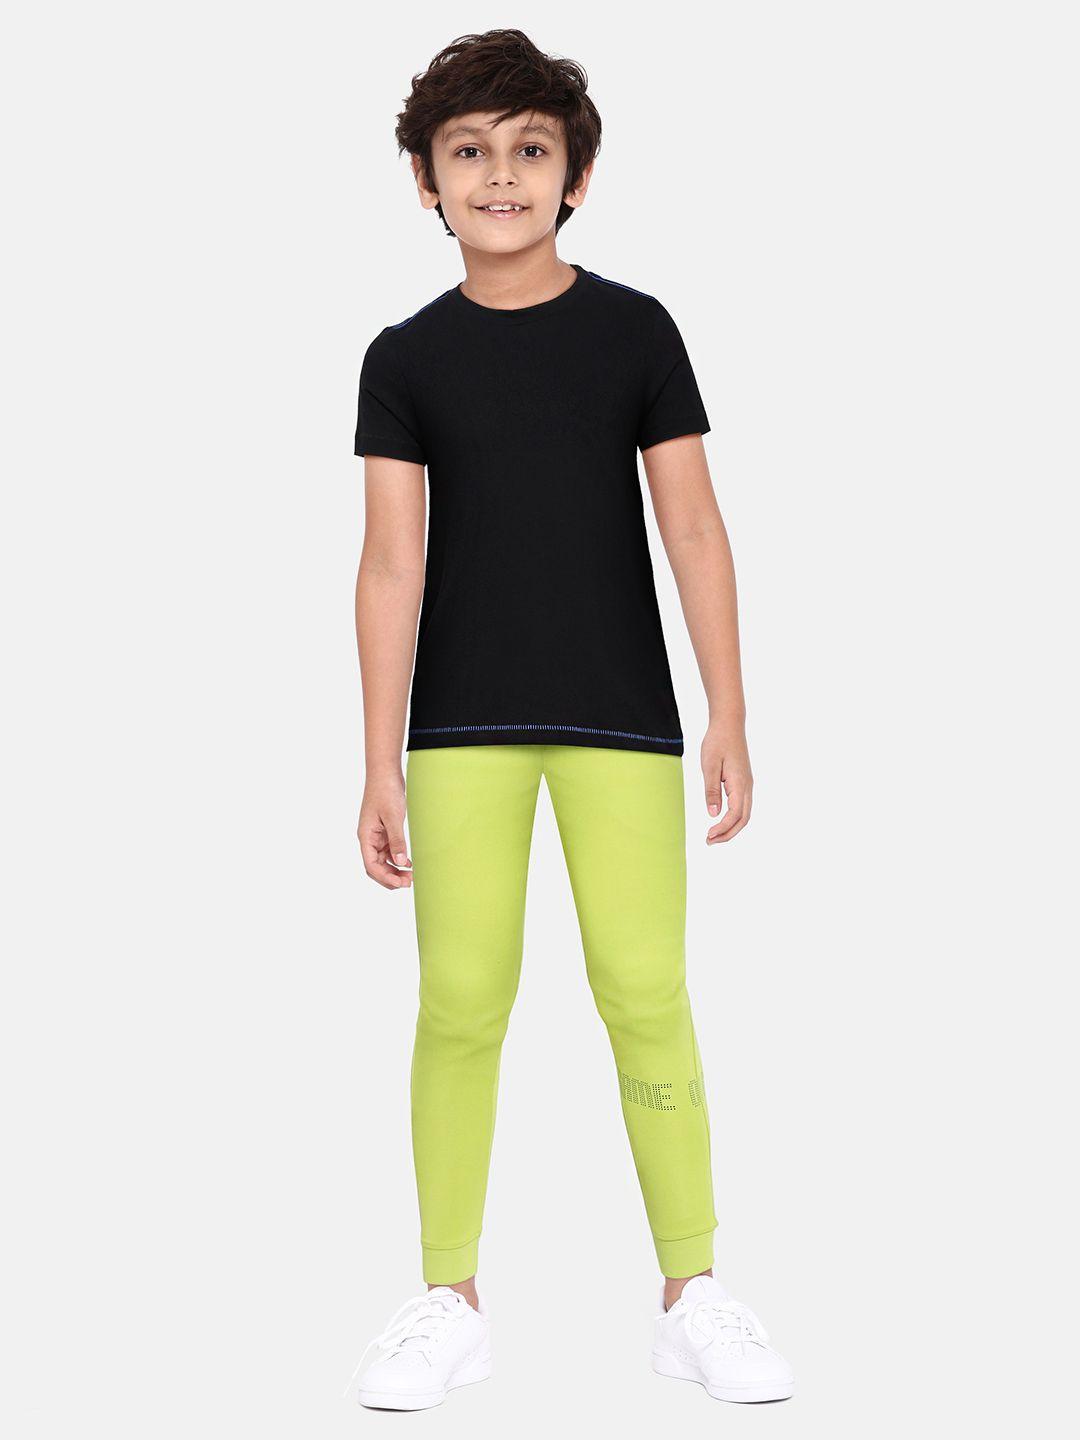 hrx by hrithik roshan u-17 active boys lime punch rapid-dry typography joggers